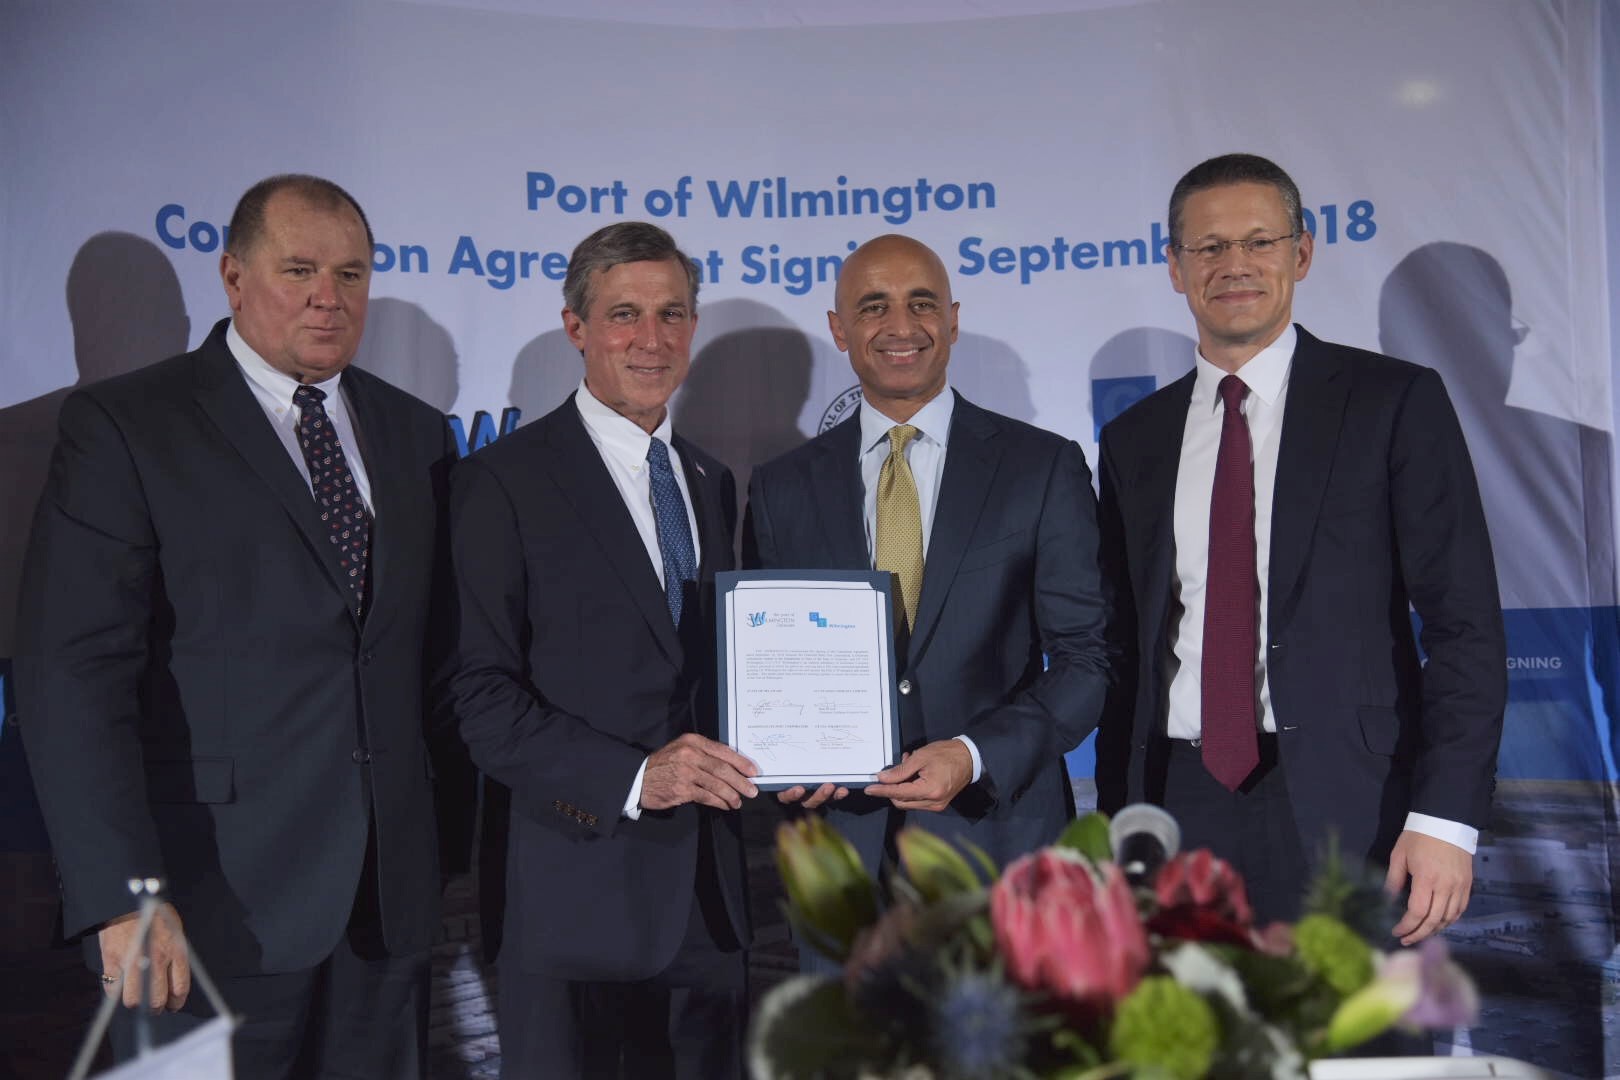 Port of Wilmington Concession Agreement Signing